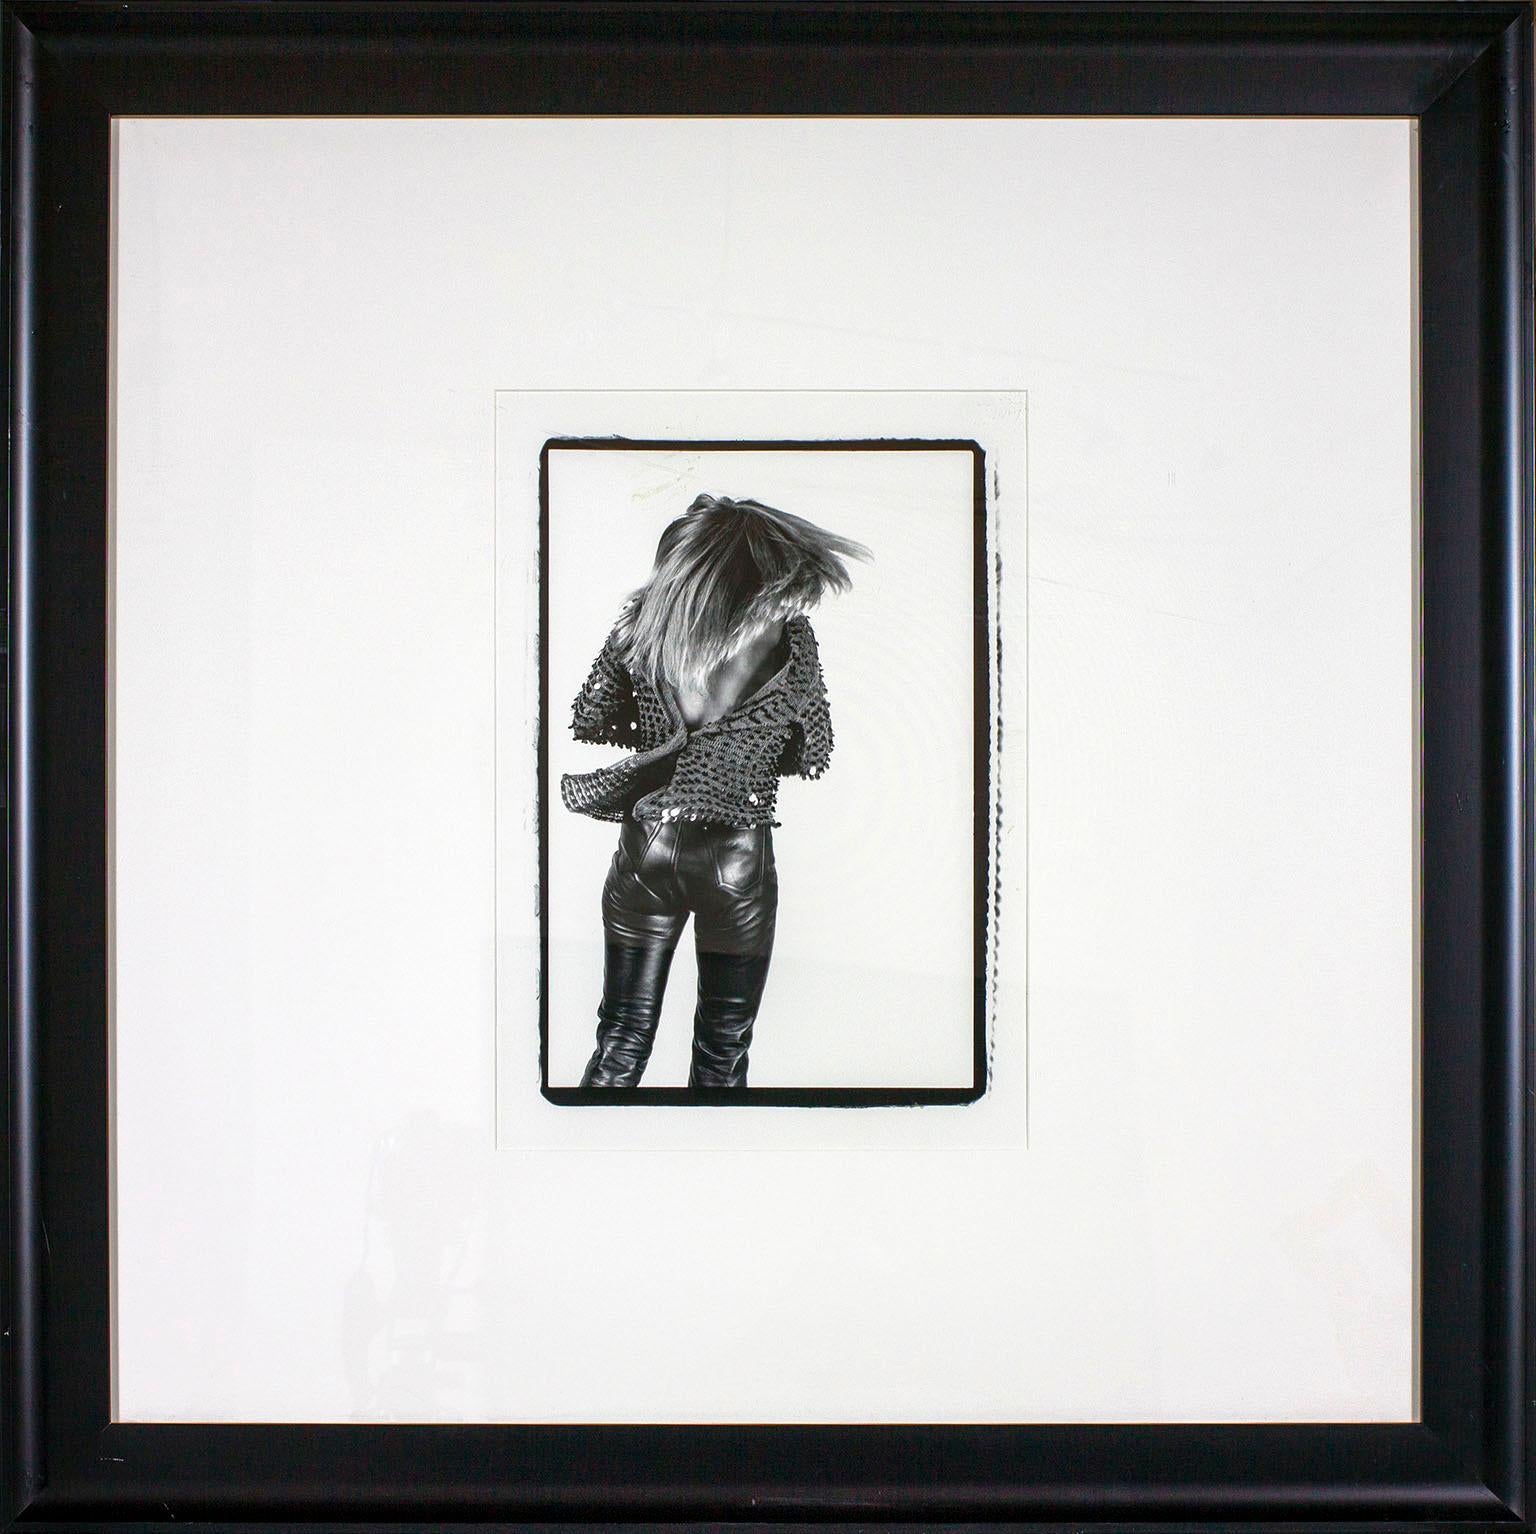 "Tina Turner 'The Back'" framed black and white photograph by Lynn Goldsmith. Image size: 16 3/4 x 11 inches. This photograph was previously displayed in a guest room of the original Hard Rock Hotel and Casino in Las Vegas, Nevada, and comes with a